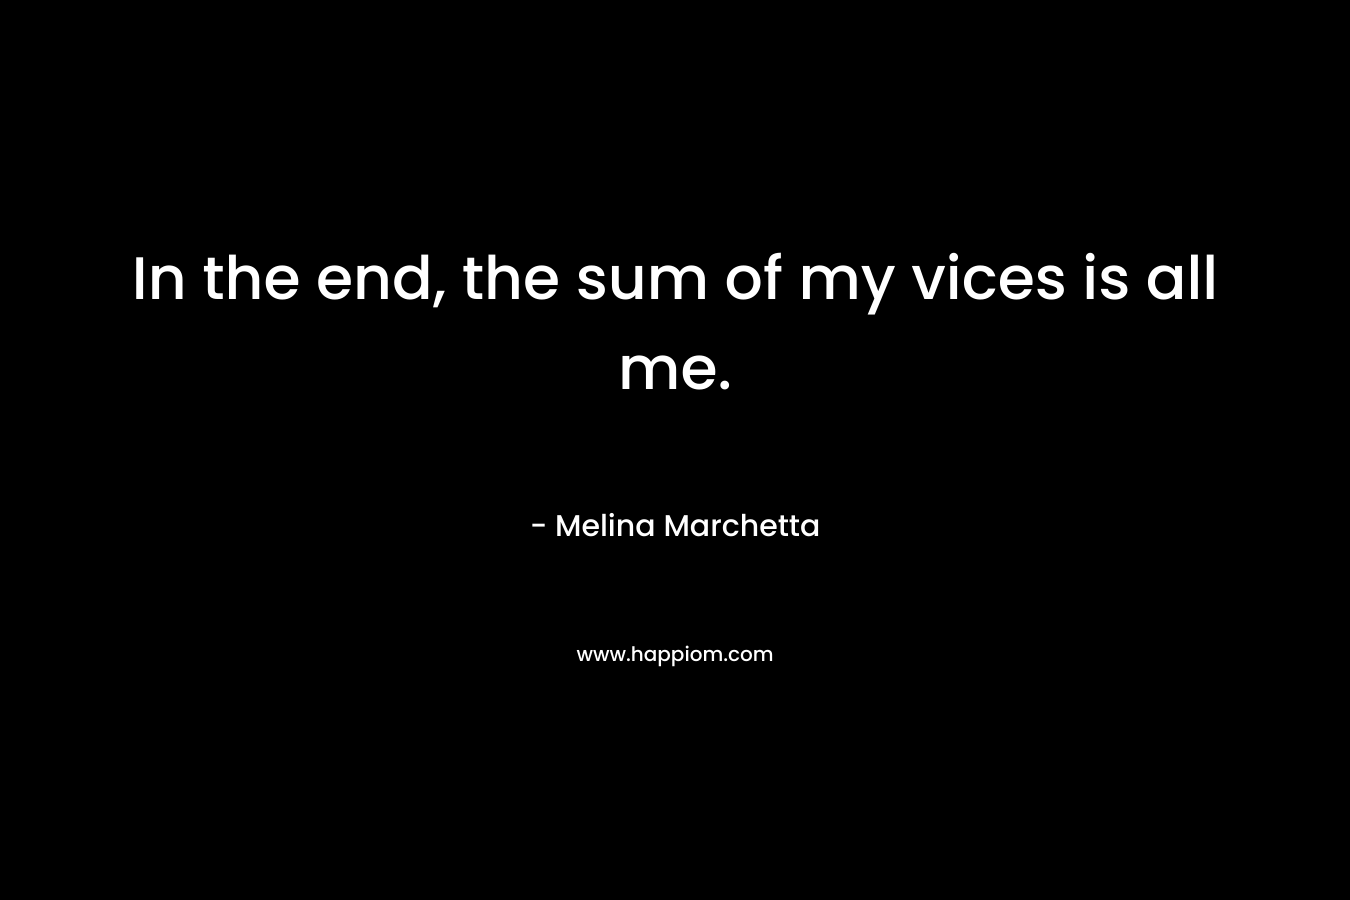 In the end, the sum of my vices is all me. – Melina Marchetta